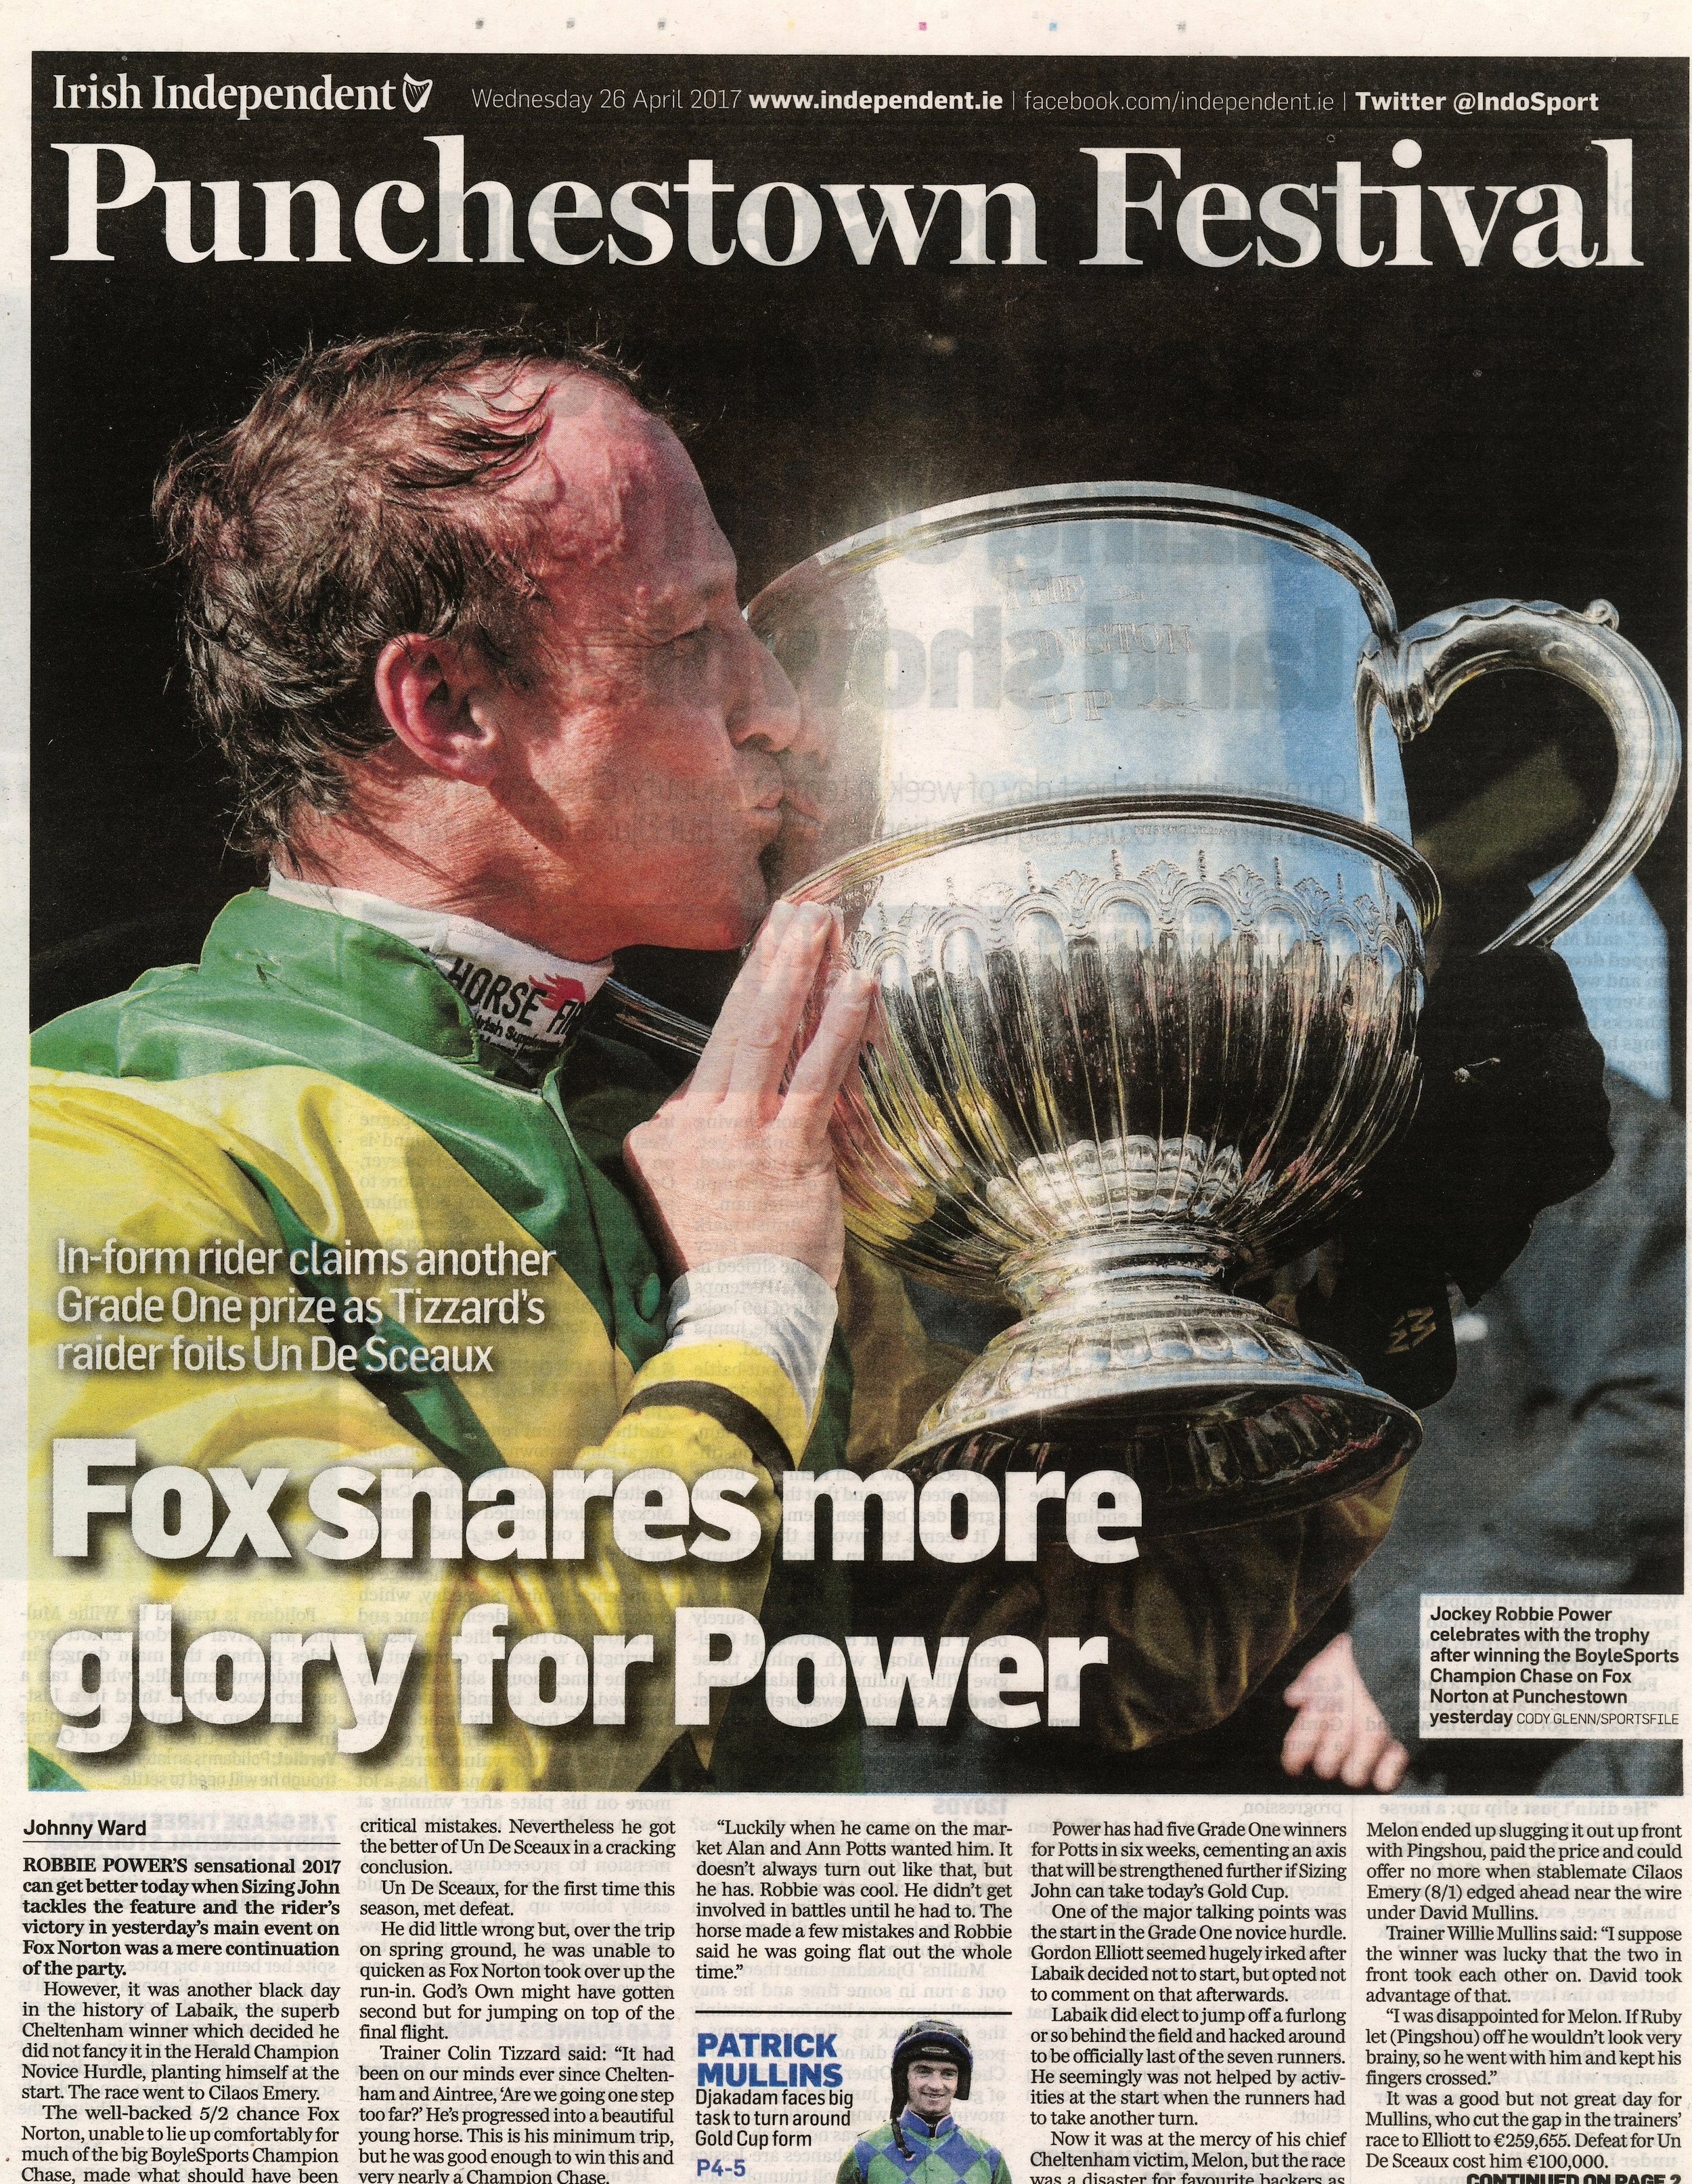  Robbie Power celebrates with the trophy after victory on Fox Norton at Punchestown Festival &nbsp; April 26 2017 &nbsp; Irish Independent  